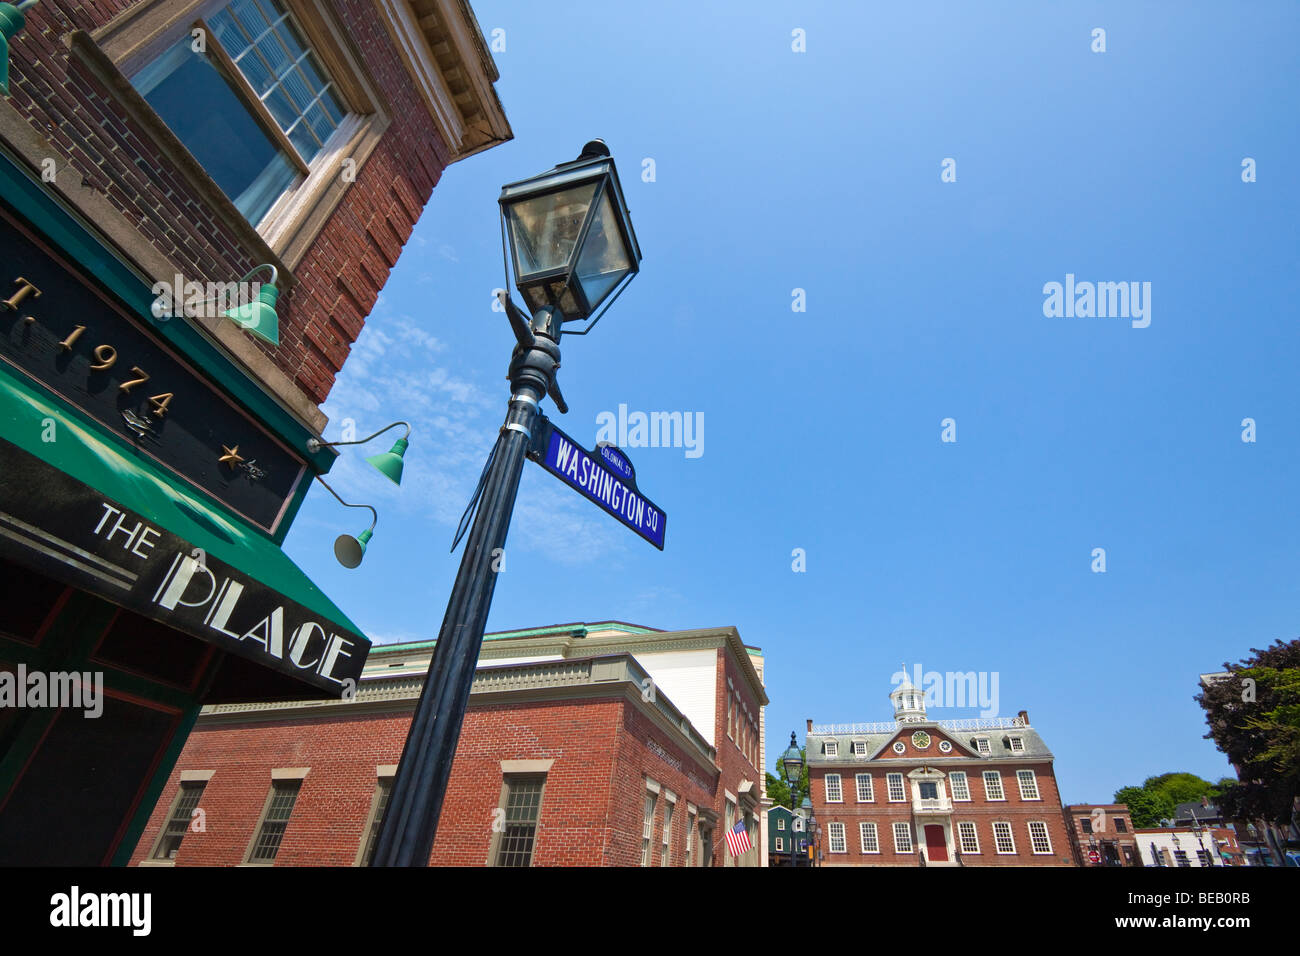 Sign on historic Washington Square and brick Georgian-style Old Colony House (1741) in the background, Newport, Rhode Island USA Stock Photo